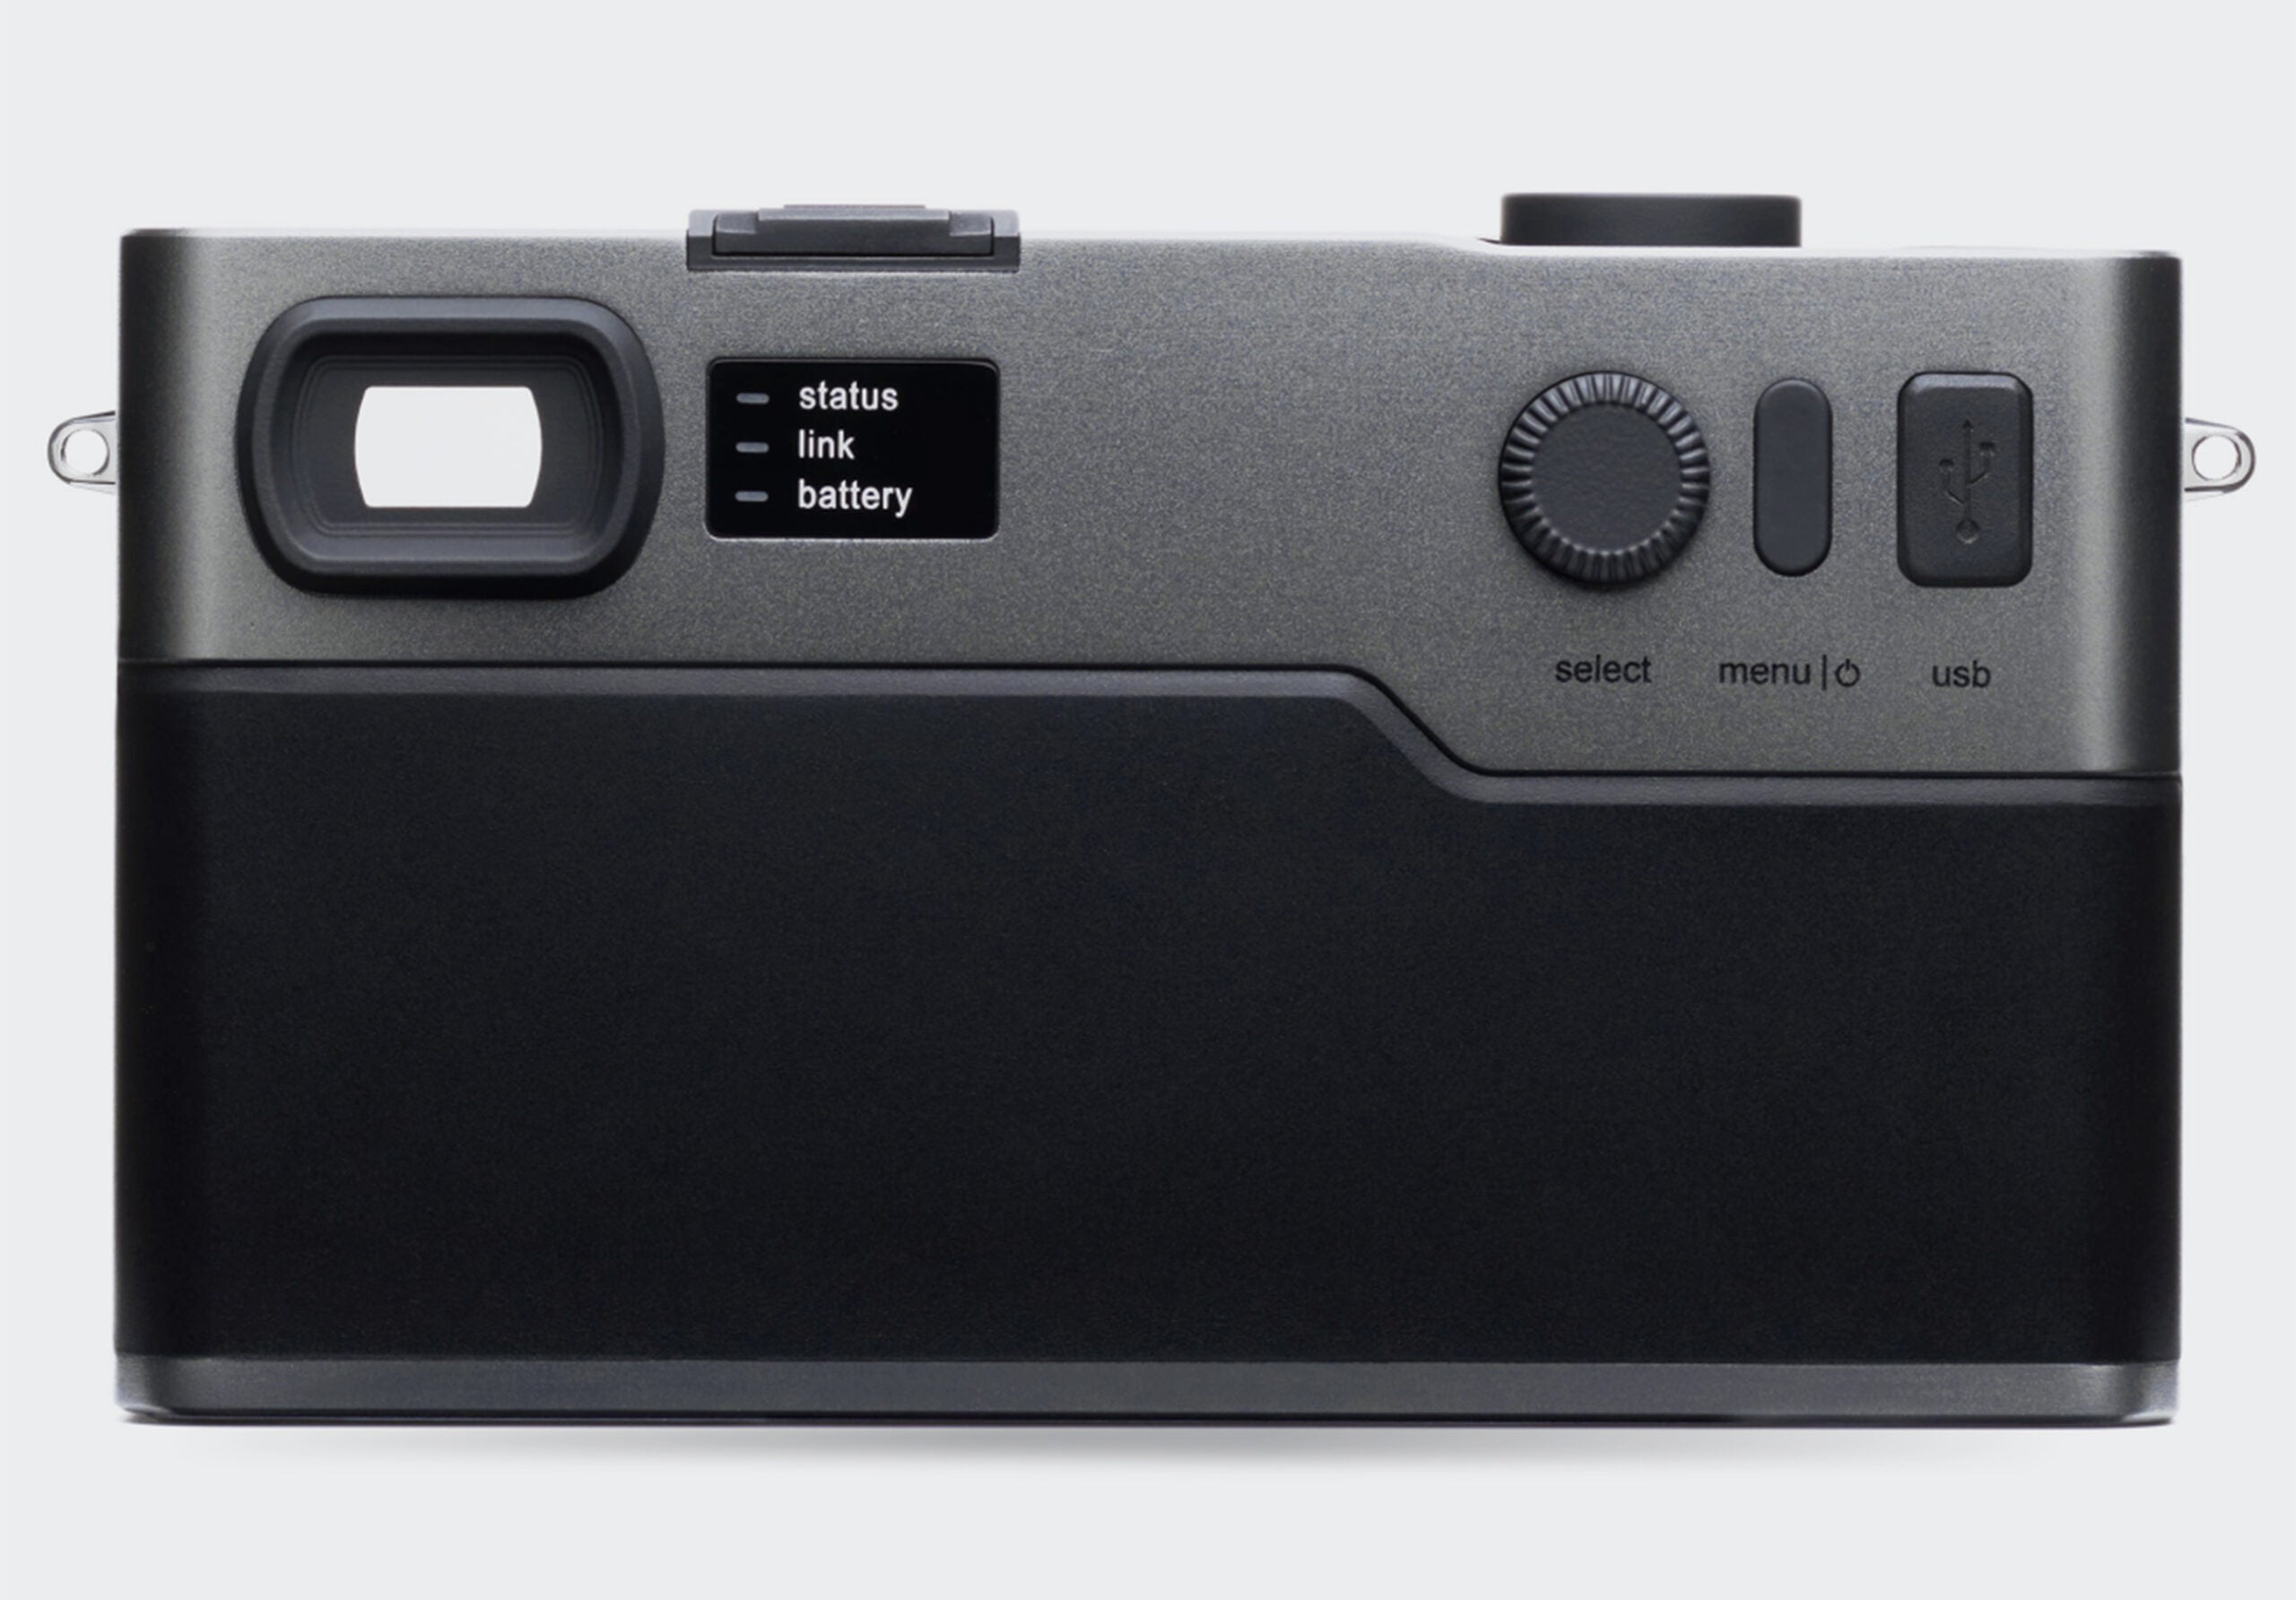 The rear of the new Pixii camera